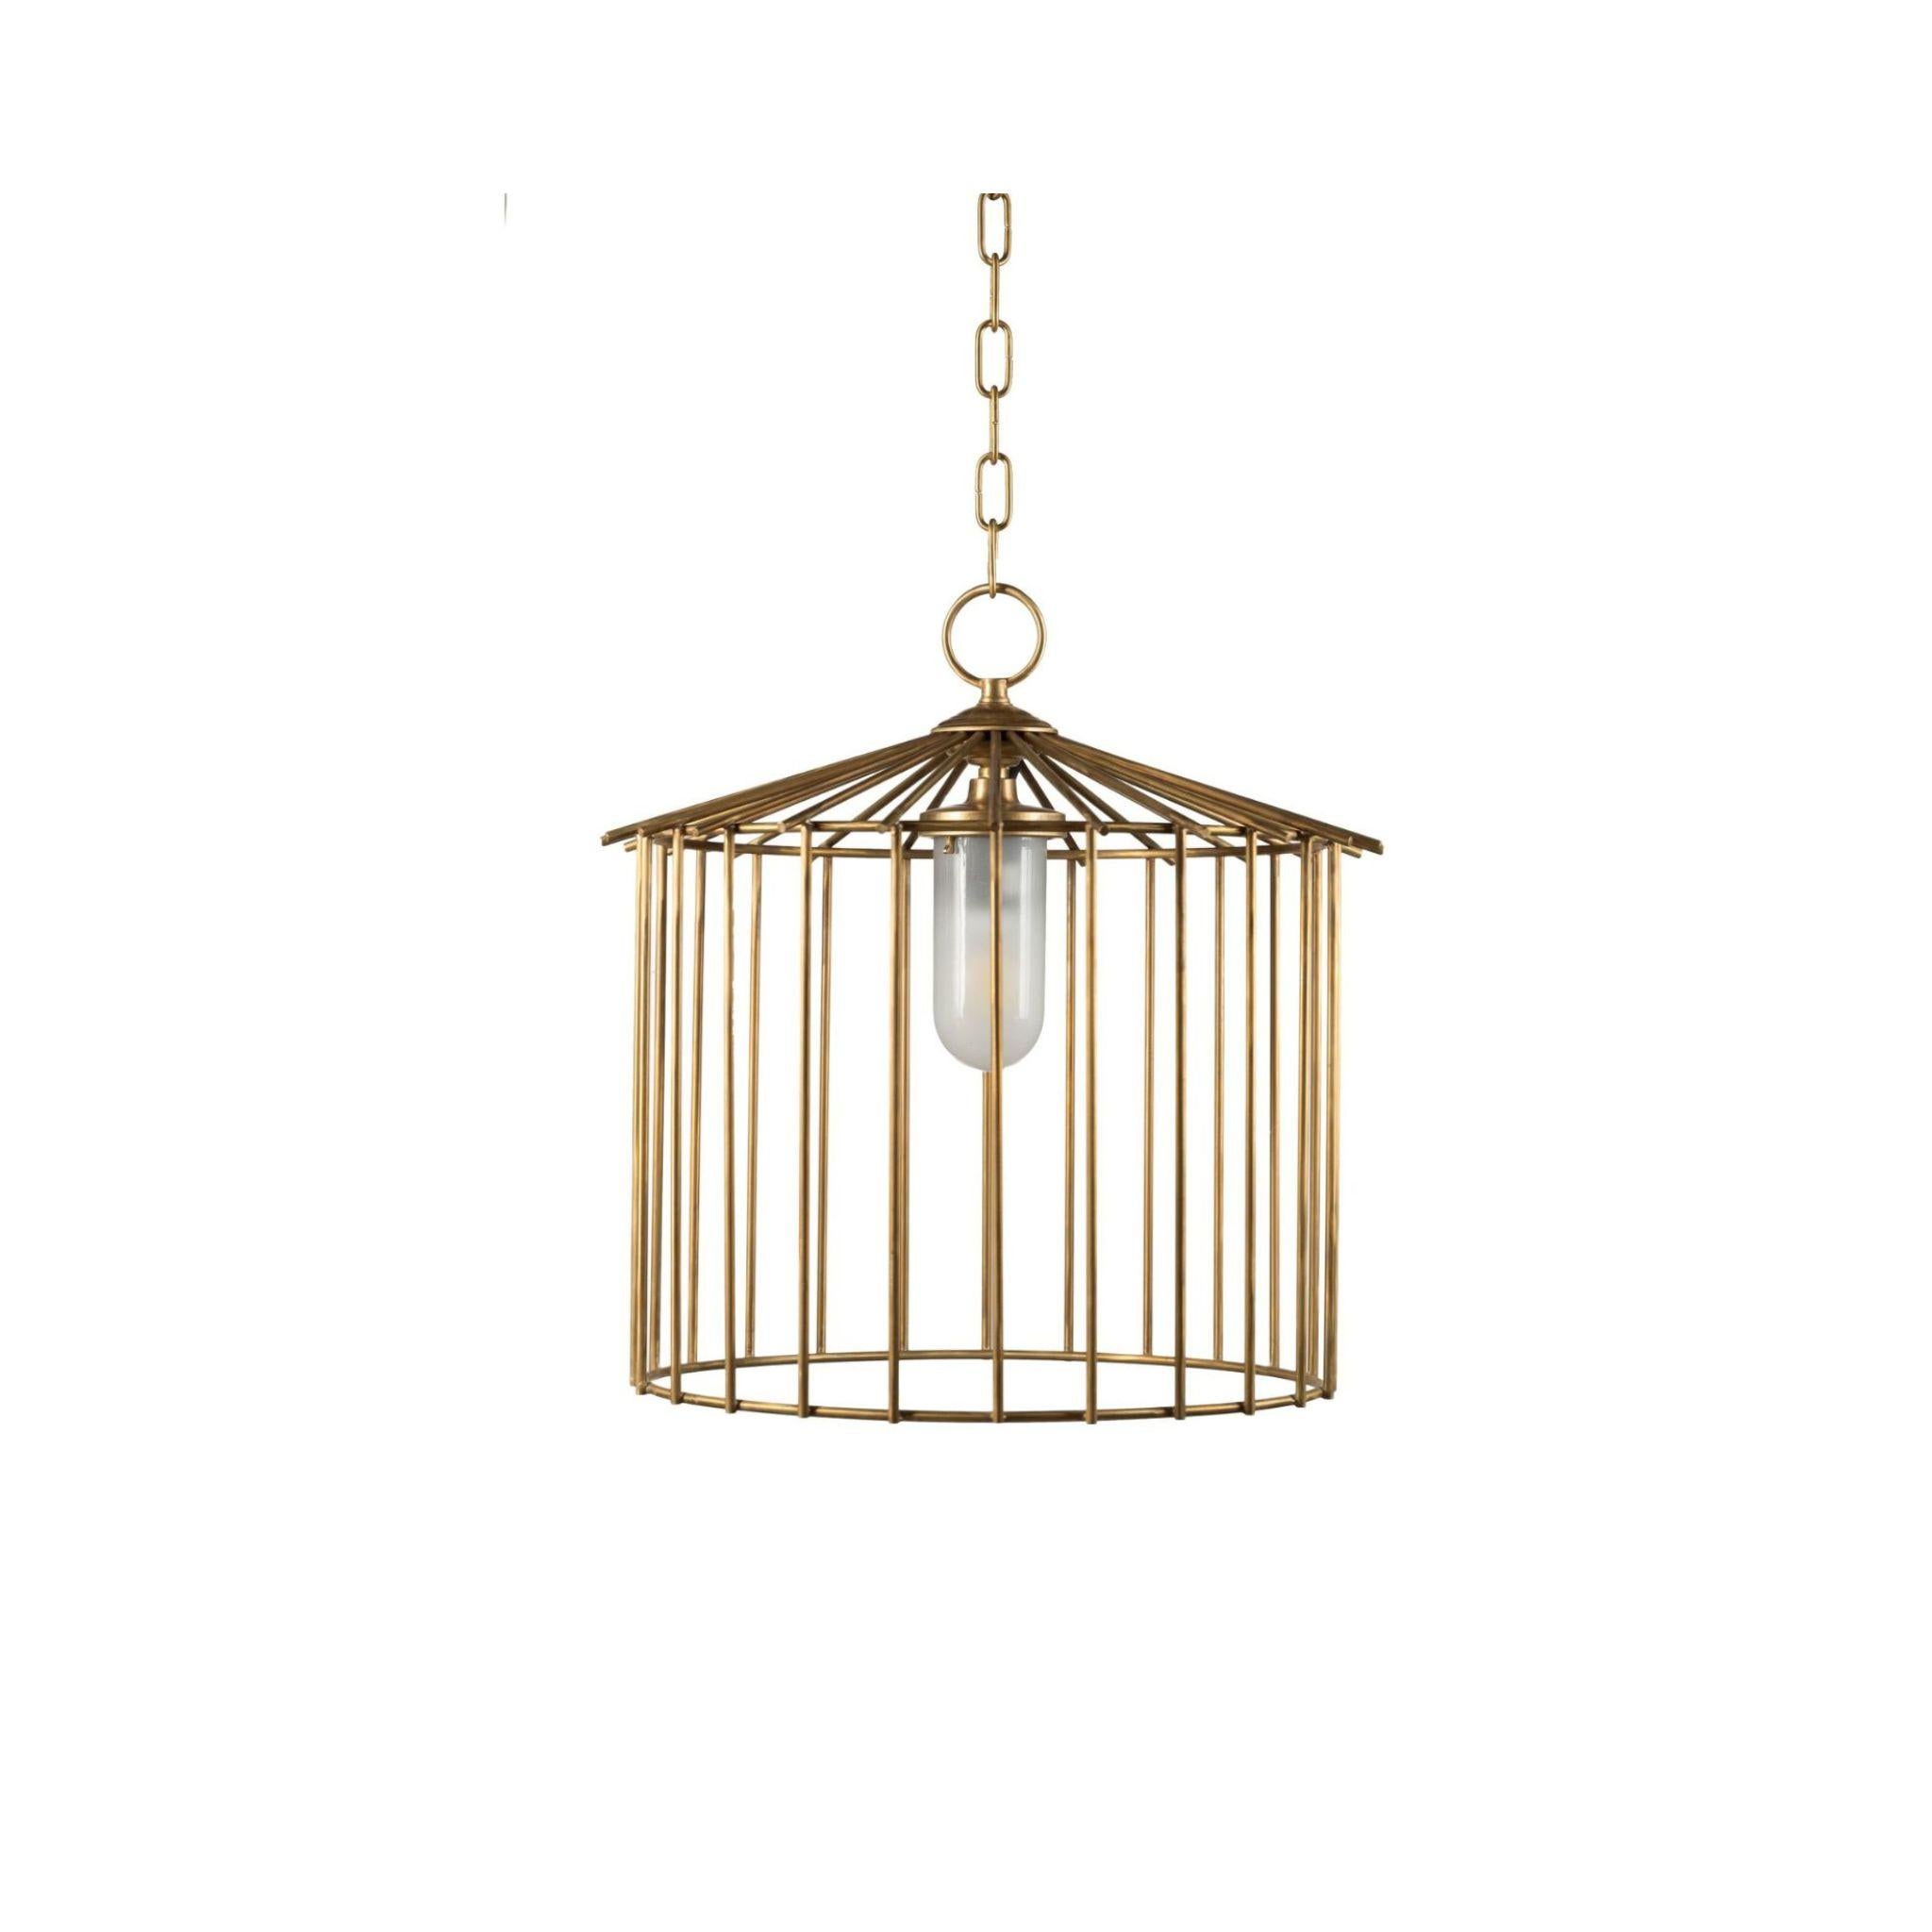 Chandelier born inside the Cage line by Brass Brothers & Co. has the characteristic cylindrical cage shape made with solid brass bars. An object that embodies the idea of the designer, the young creative Niccolò De Ruvo, of proposing a gypsy style